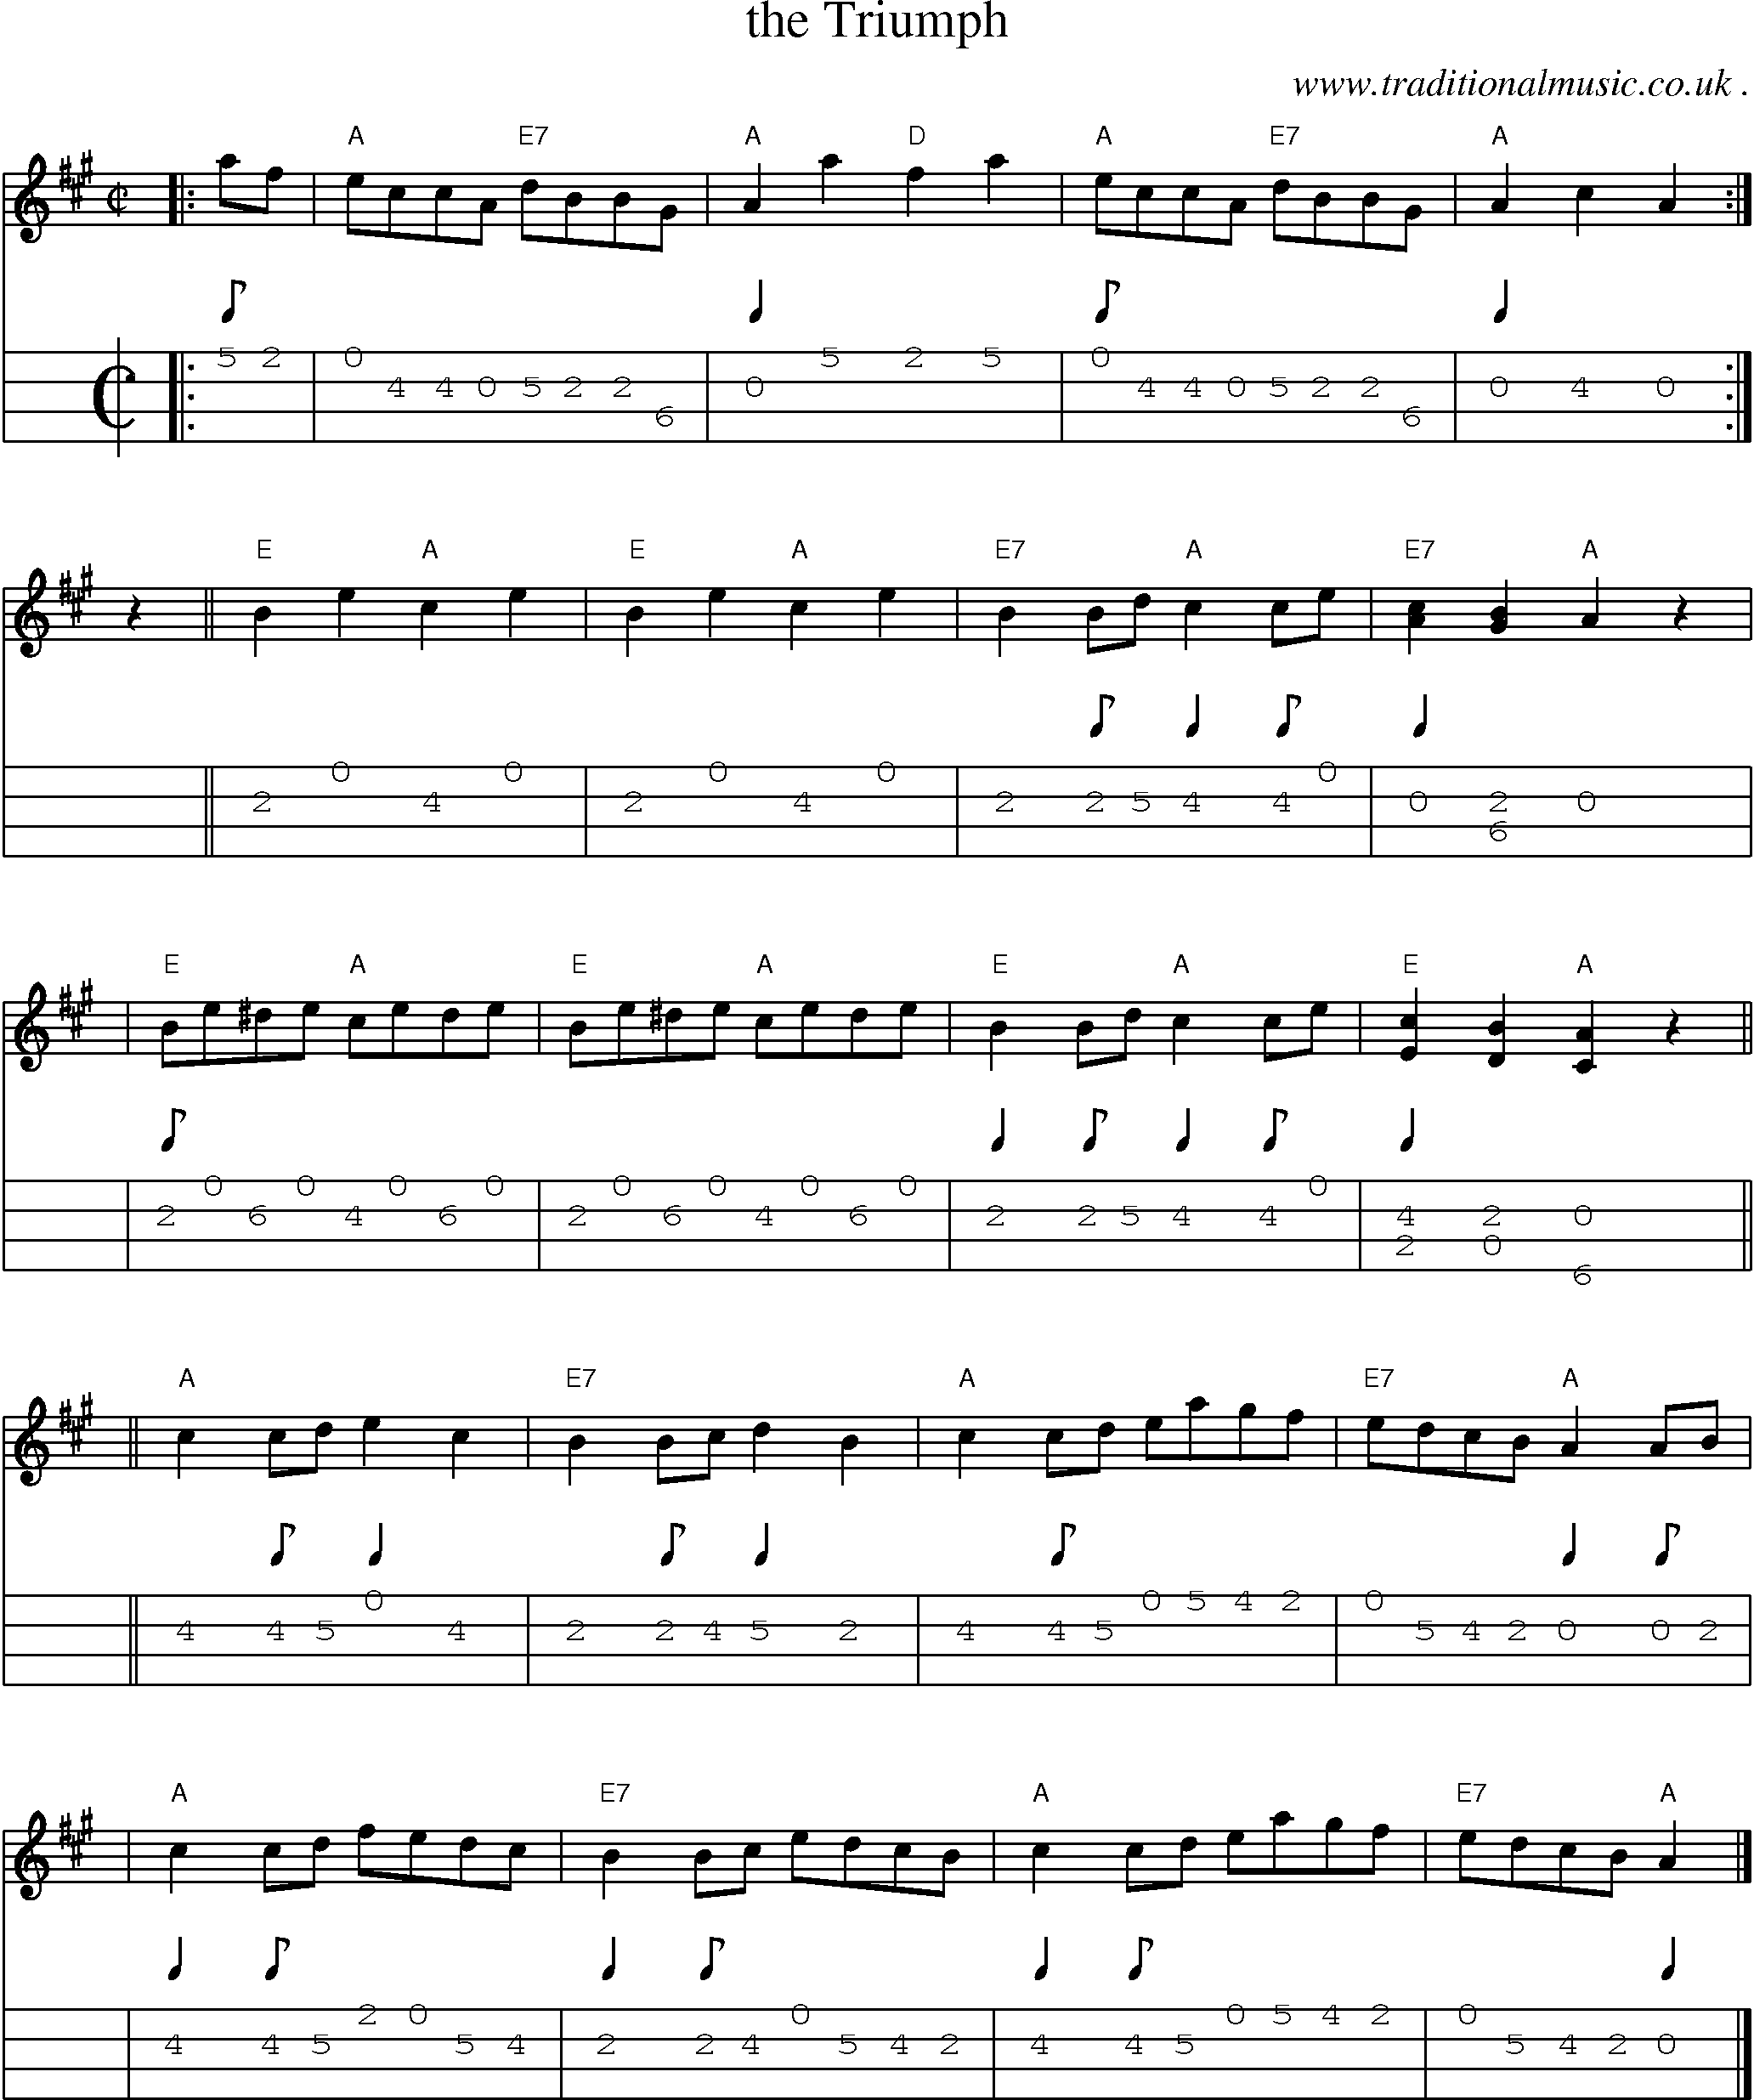 Sheet-music  score, Chords and Mandolin Tabs for The Triumph